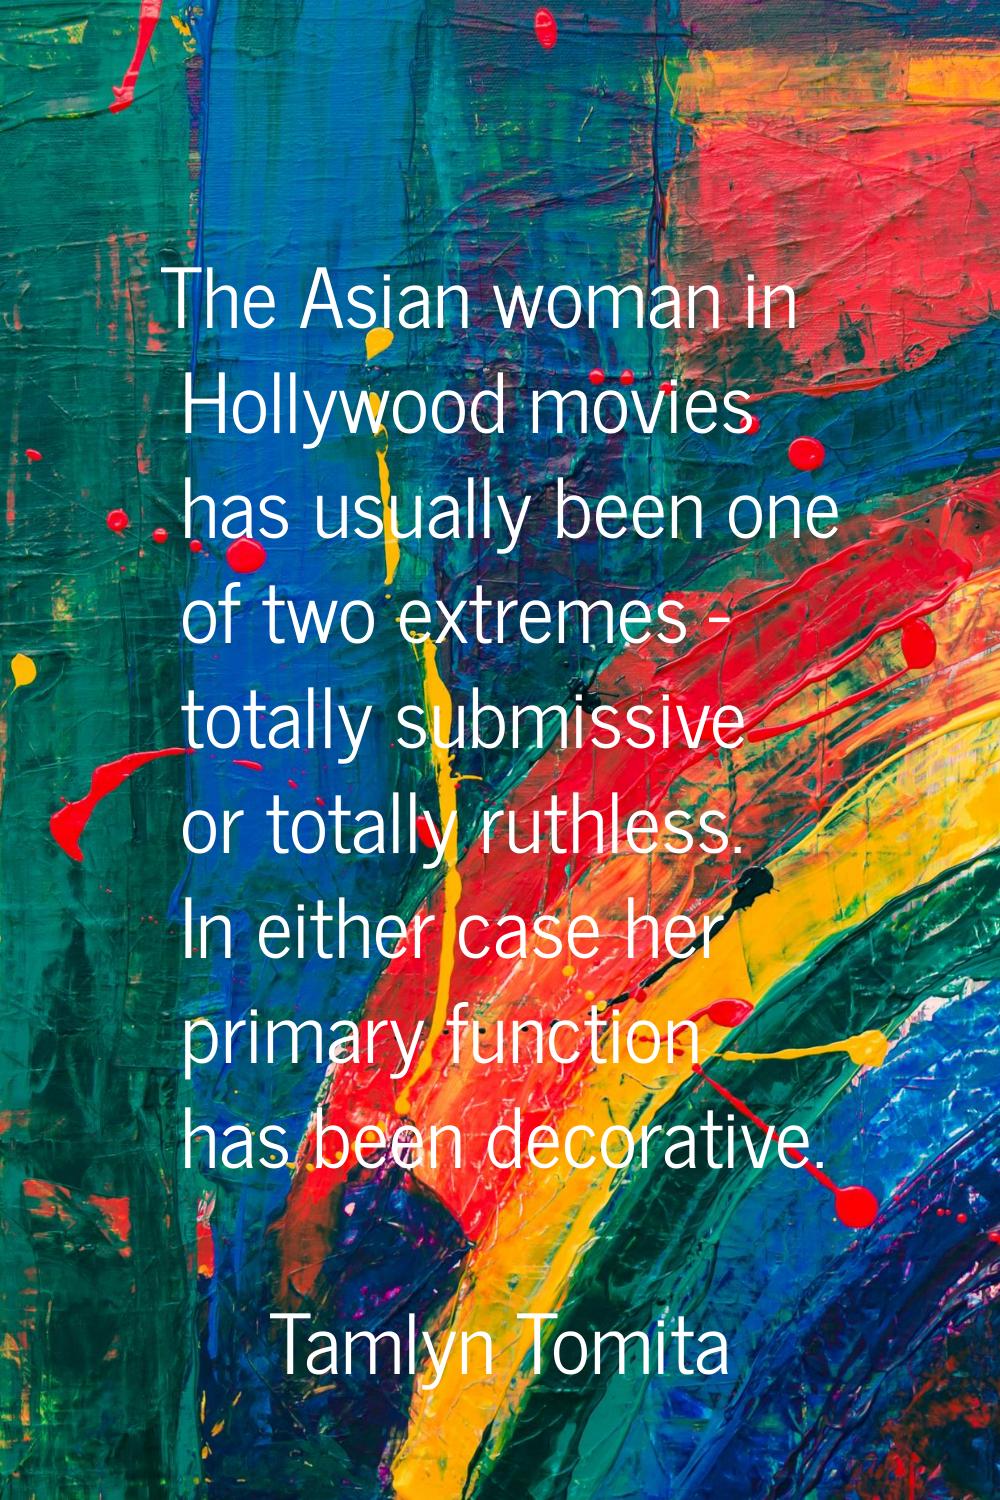 The Asian woman in Hollywood movies has usually been one of two extremes - totally submissive or to